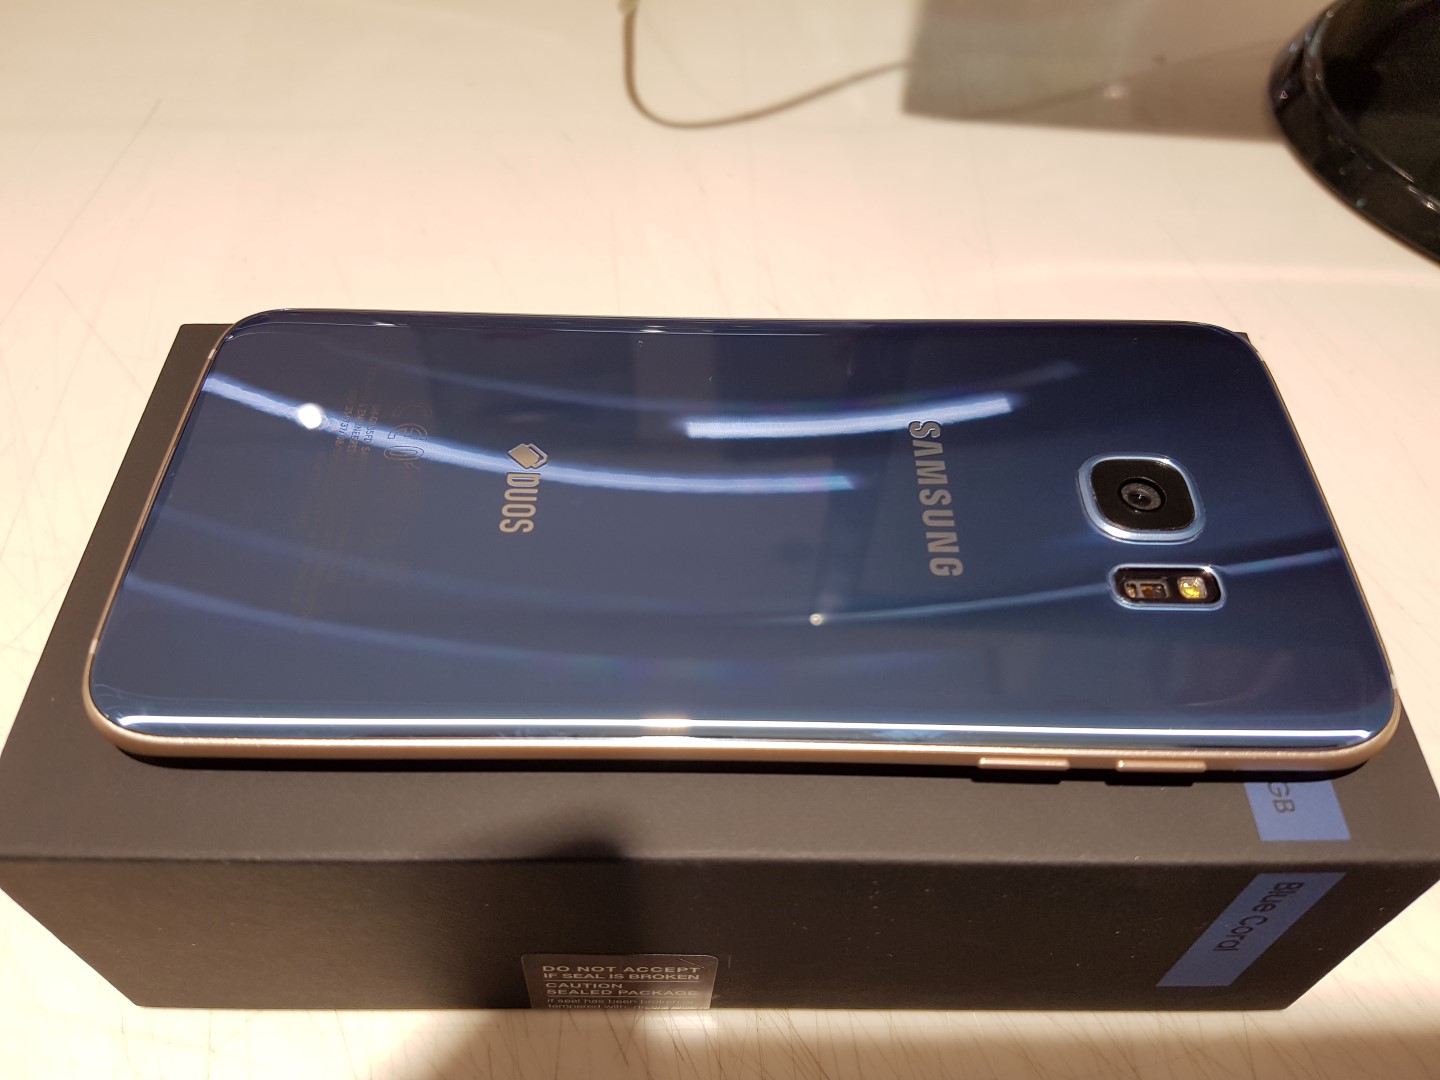 gezantschap Woedend Posters Check out these pictures of the Blue Coral Galaxy S7 edge unboxing -  SamMobile - SamMobile